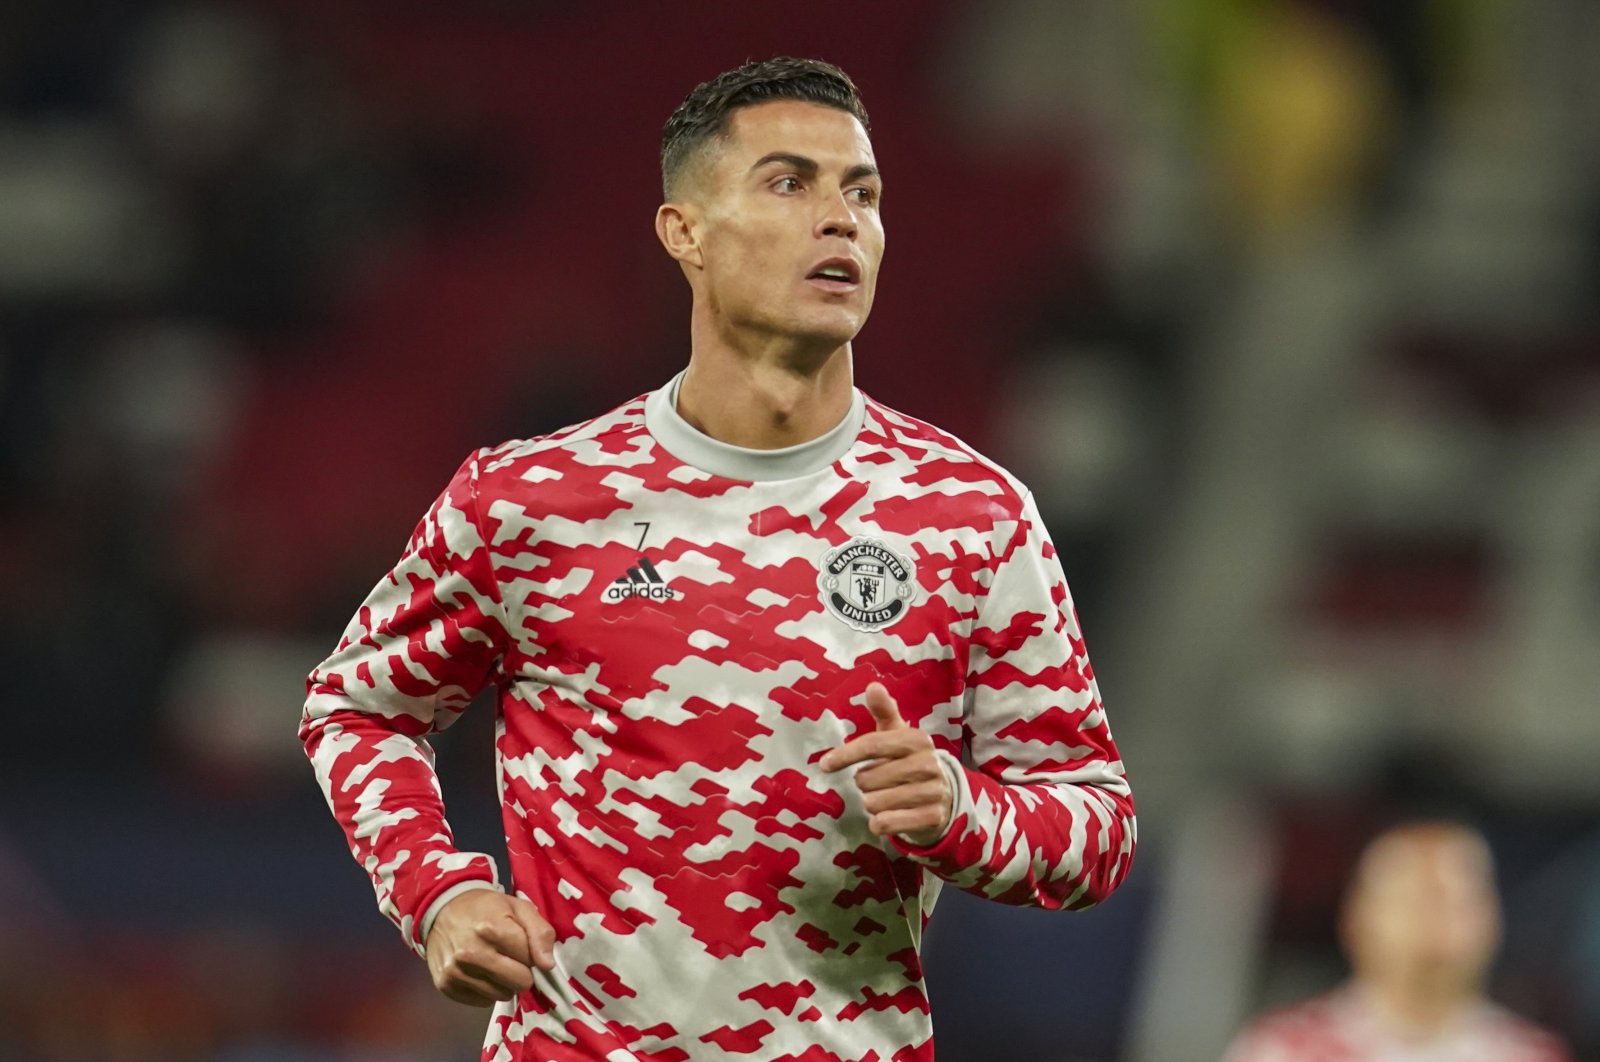 Manchester United's Cristiano Ronaldo warms up ahead of the Champions League Group F soccer match between Manchester United and Villarreal at Old Trafford, Manchester, England, Sept. 29, 2021. (AP Photo)